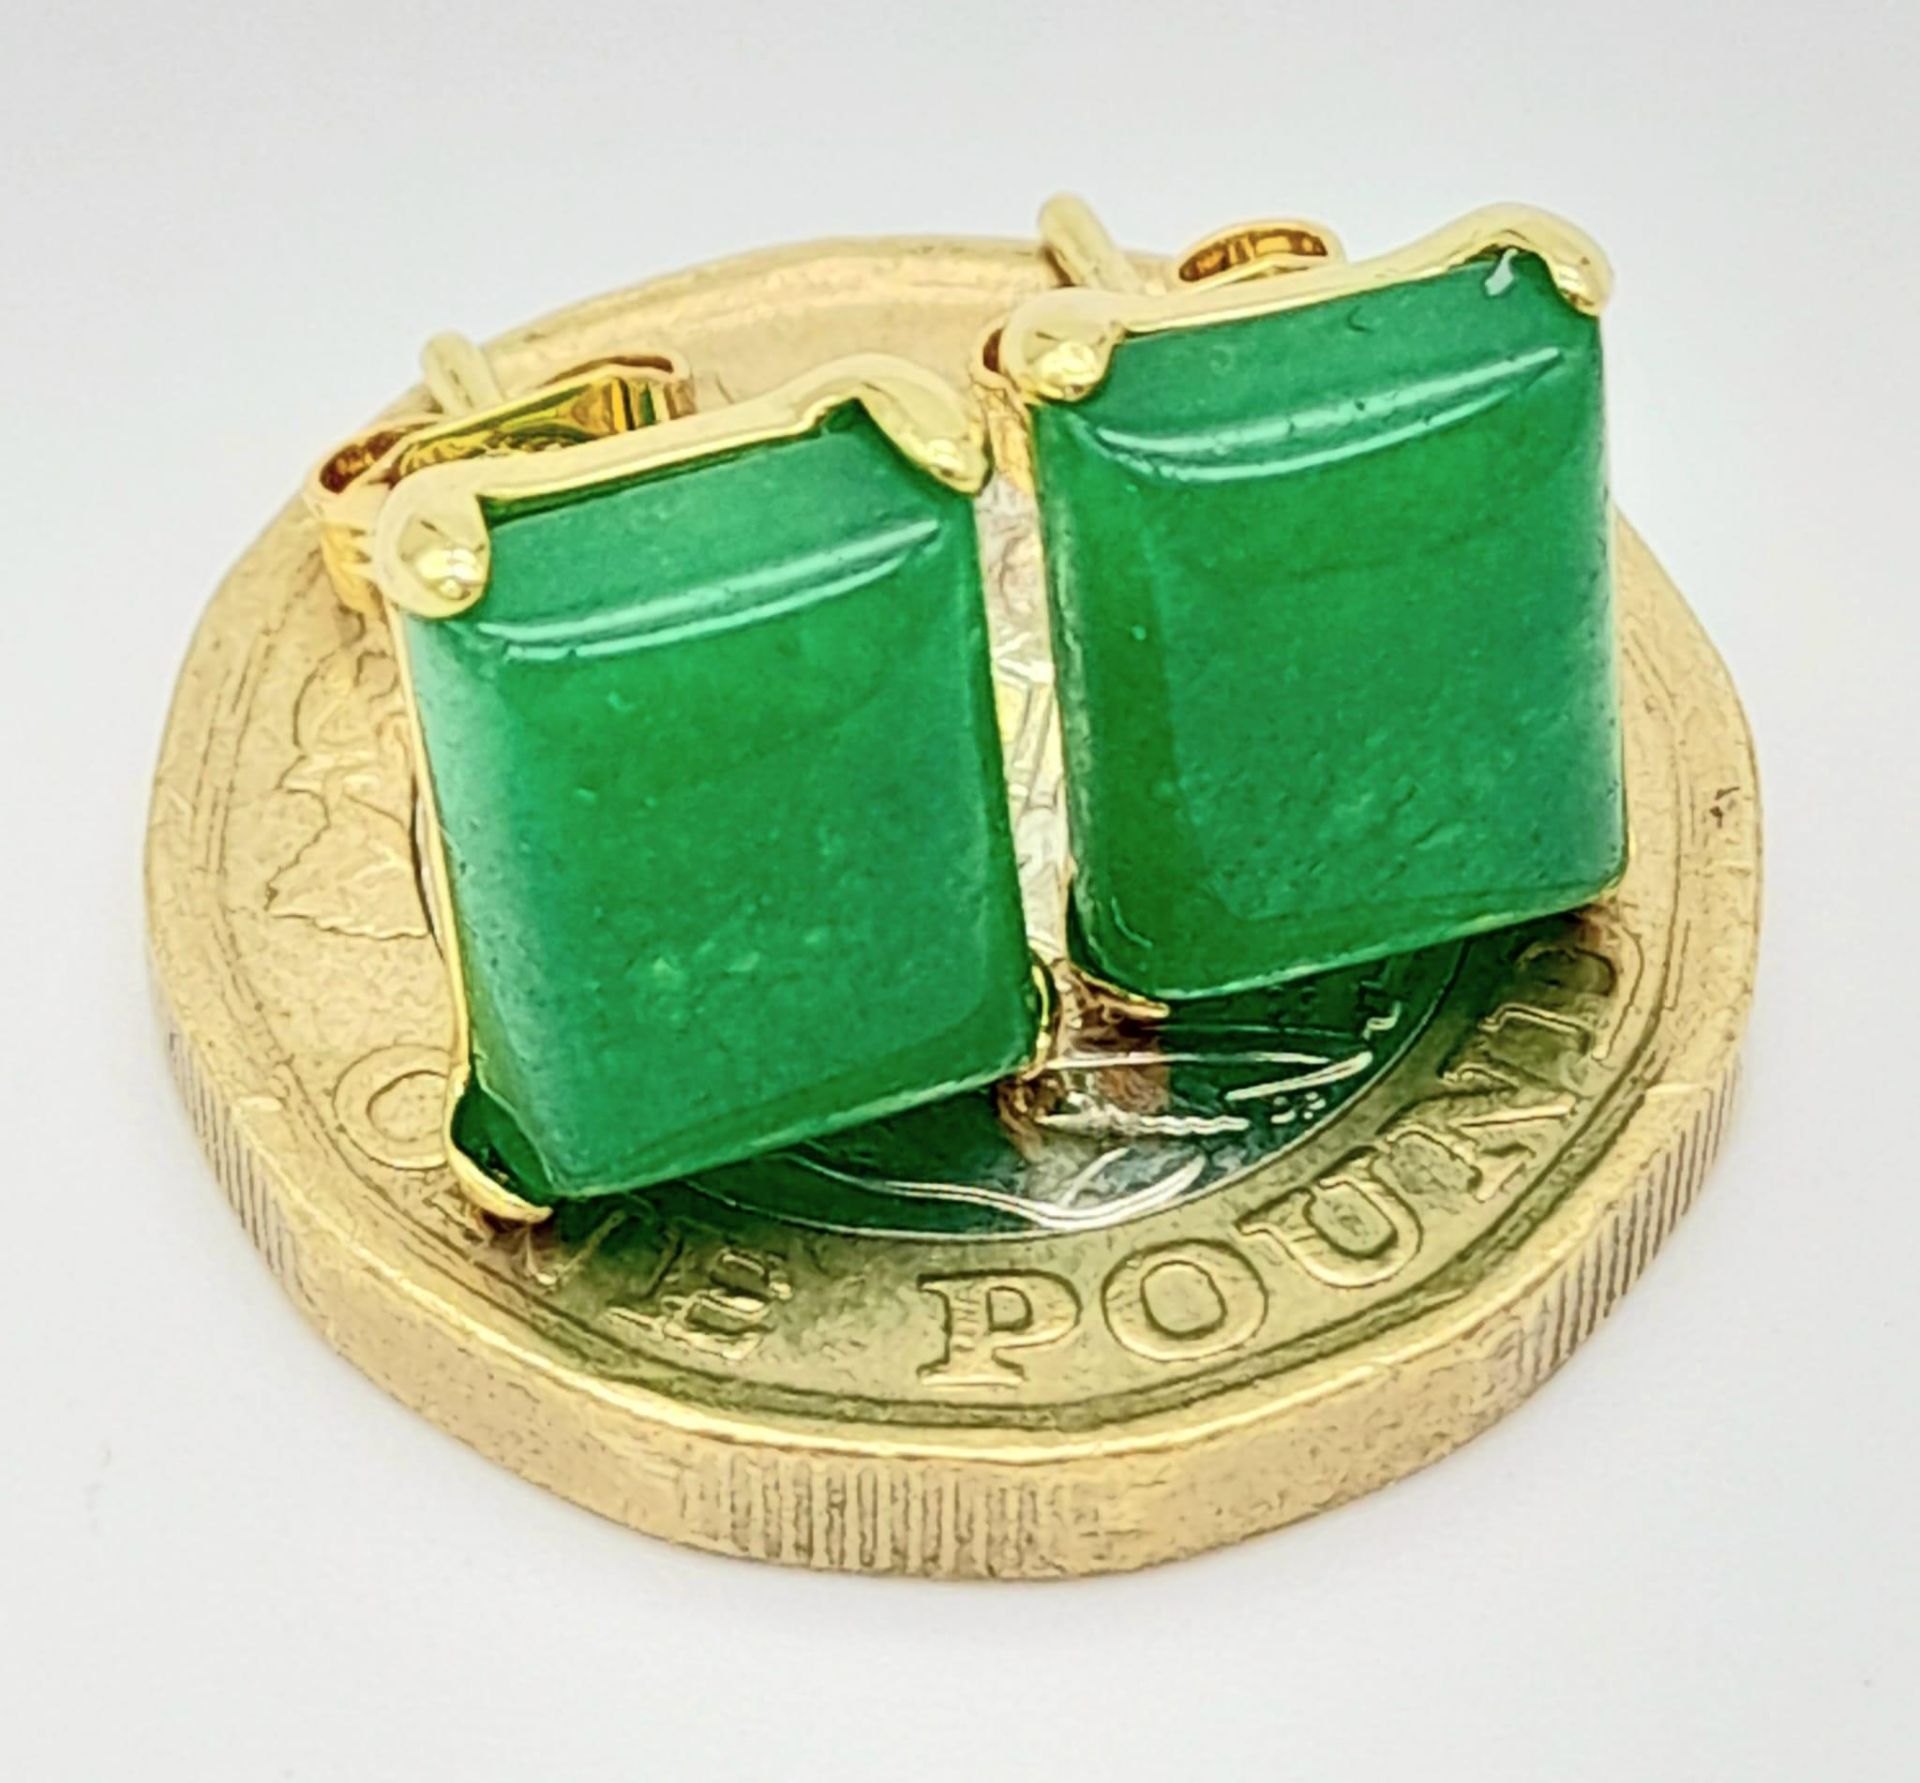 Jade Jewellery Set Including: Earrings, Ring - Size P and Pendant - 3.5cm with gilded necklace. - Image 10 of 10